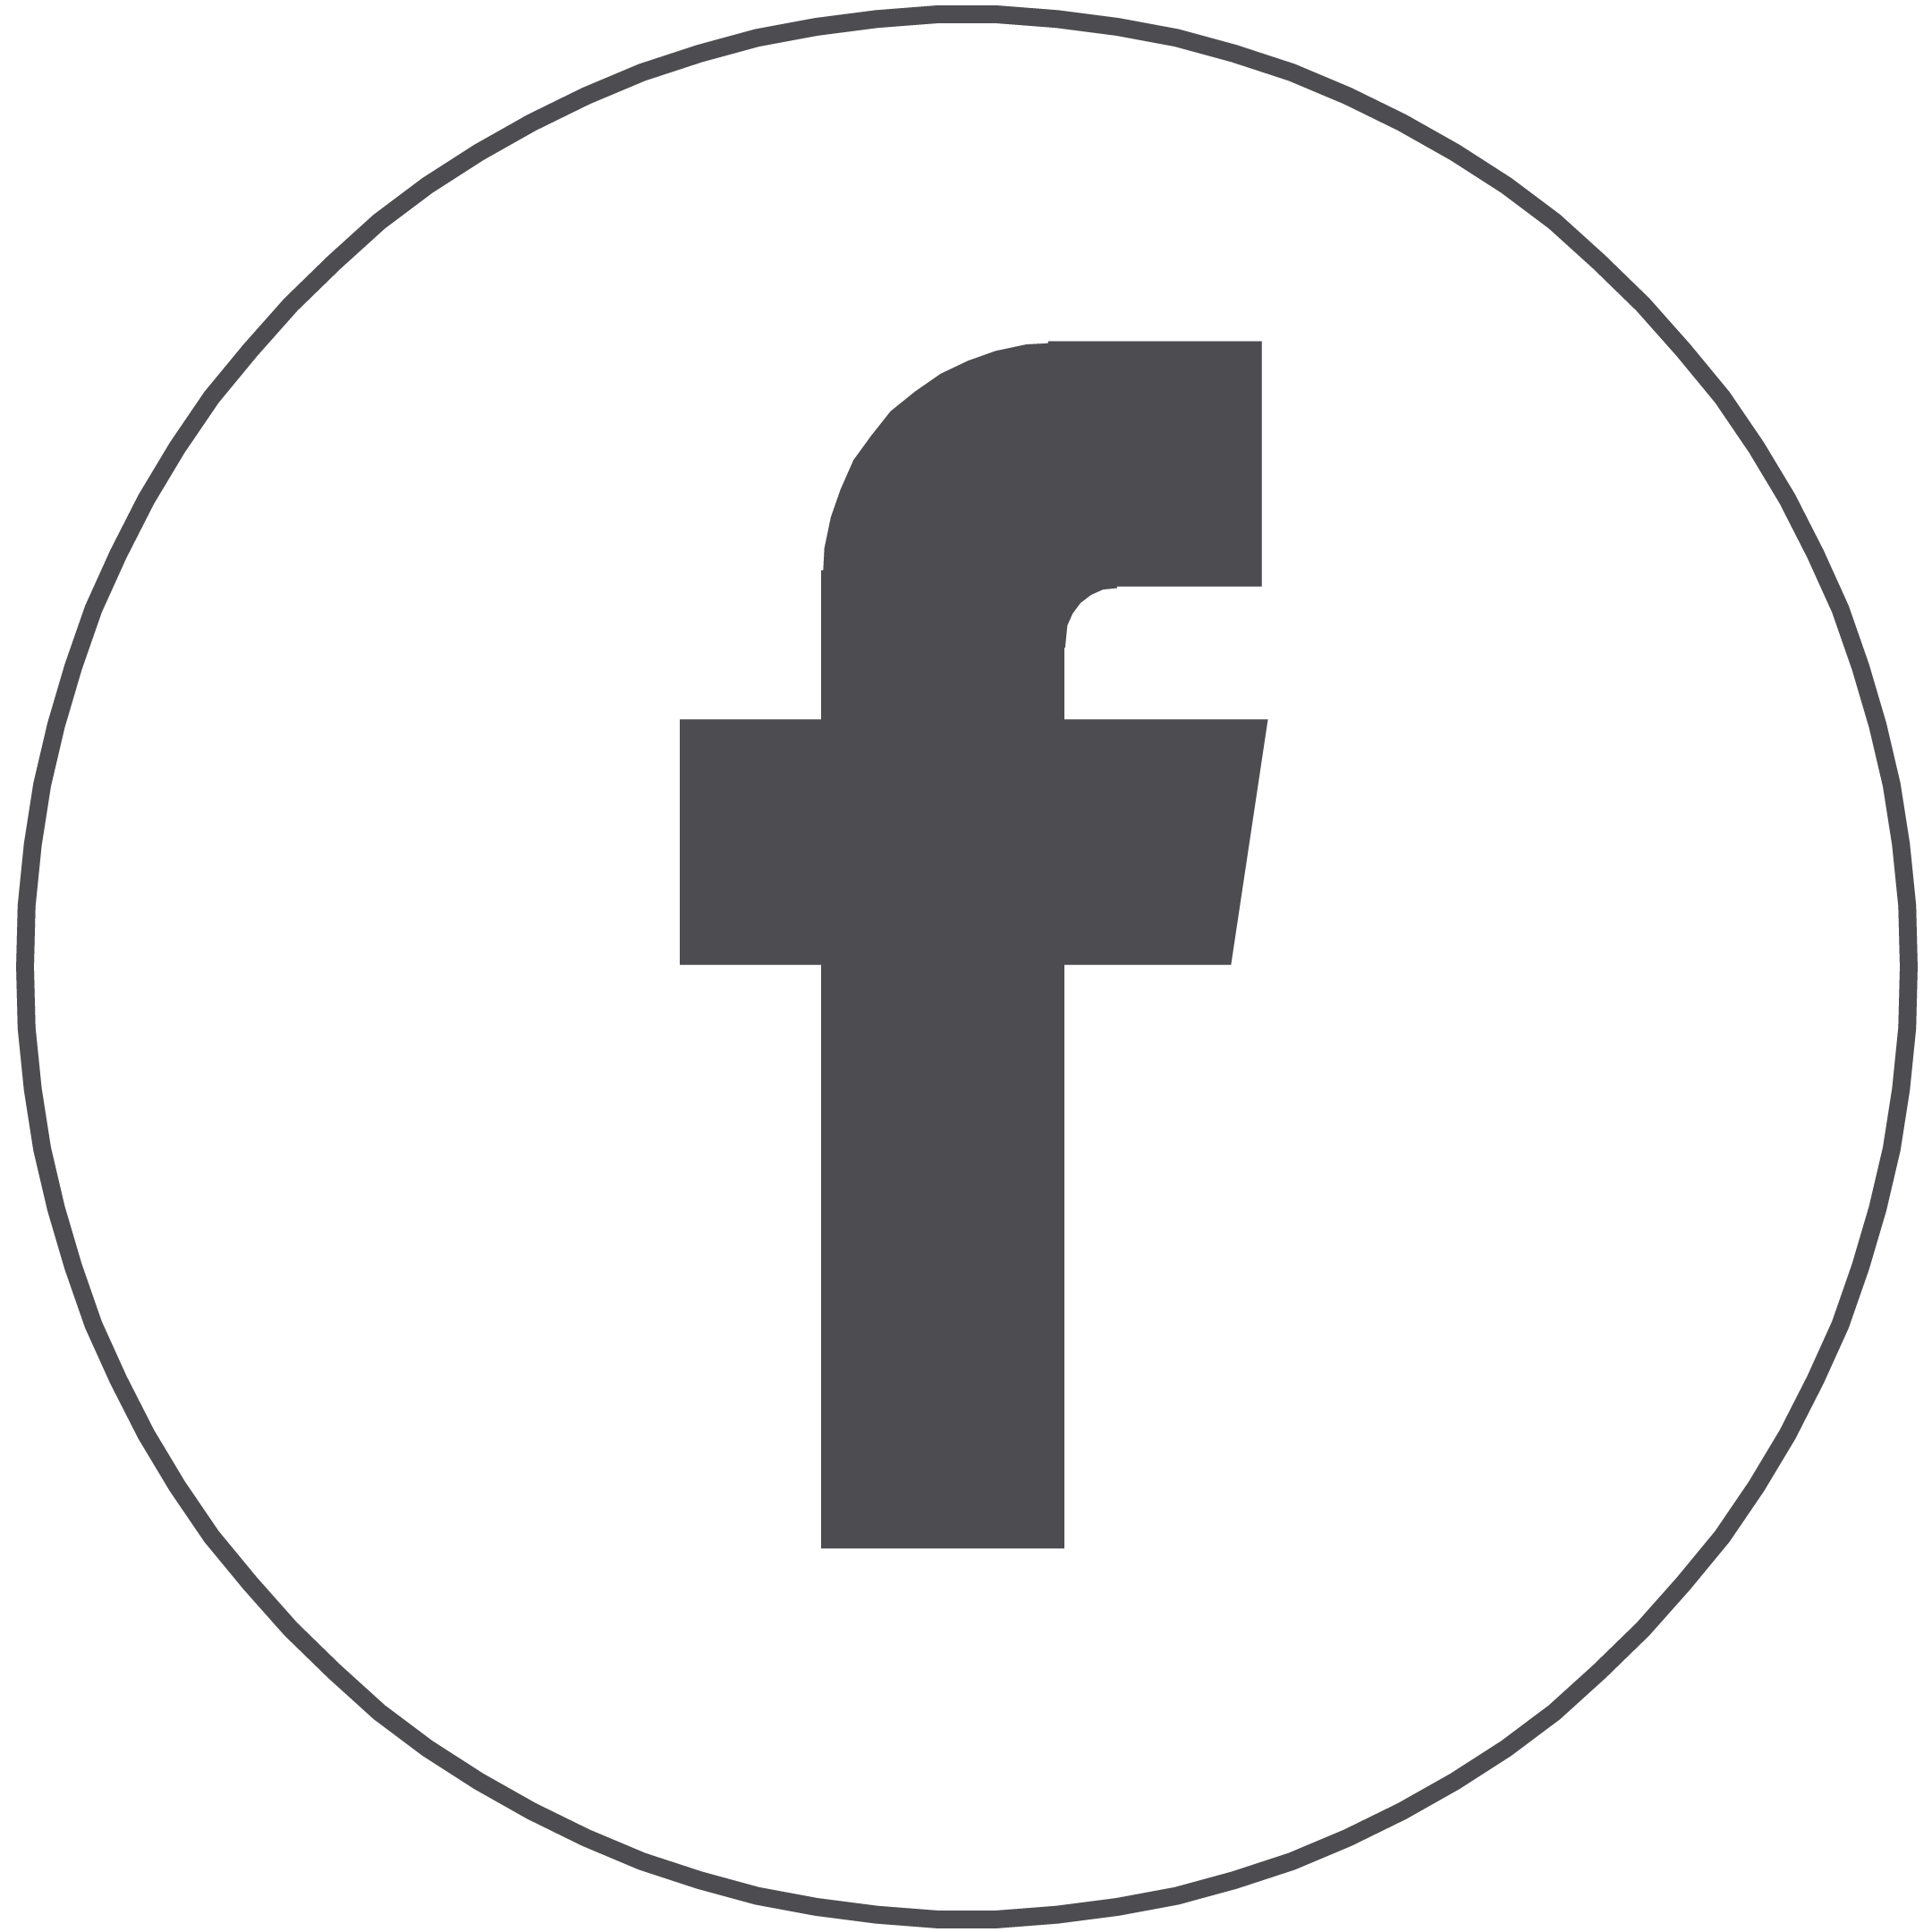 Facebook Icon Ai Png Transparent Facebook Icon Aipng Images Pluspng